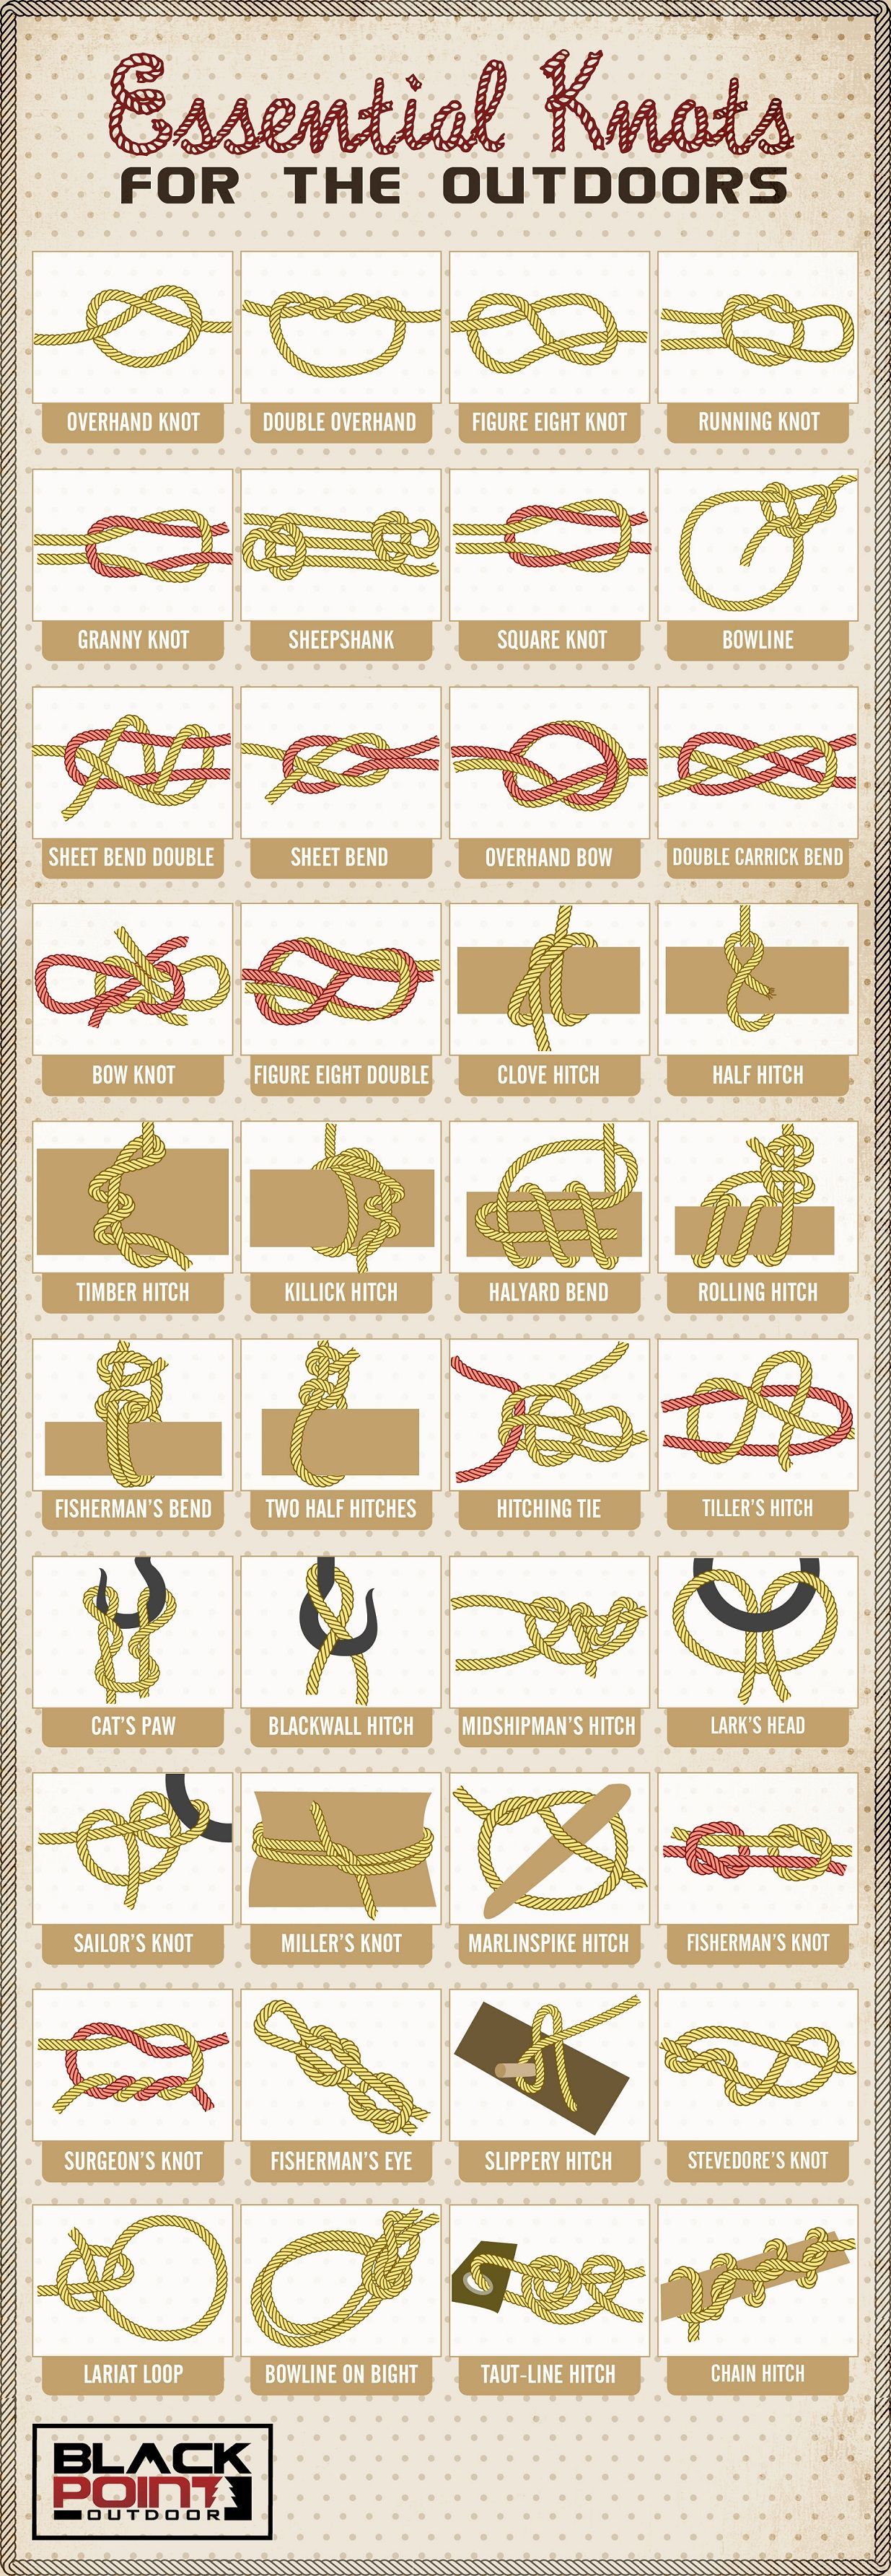 Essential Knots, Knot Tying, Knots of the outdoors-SR